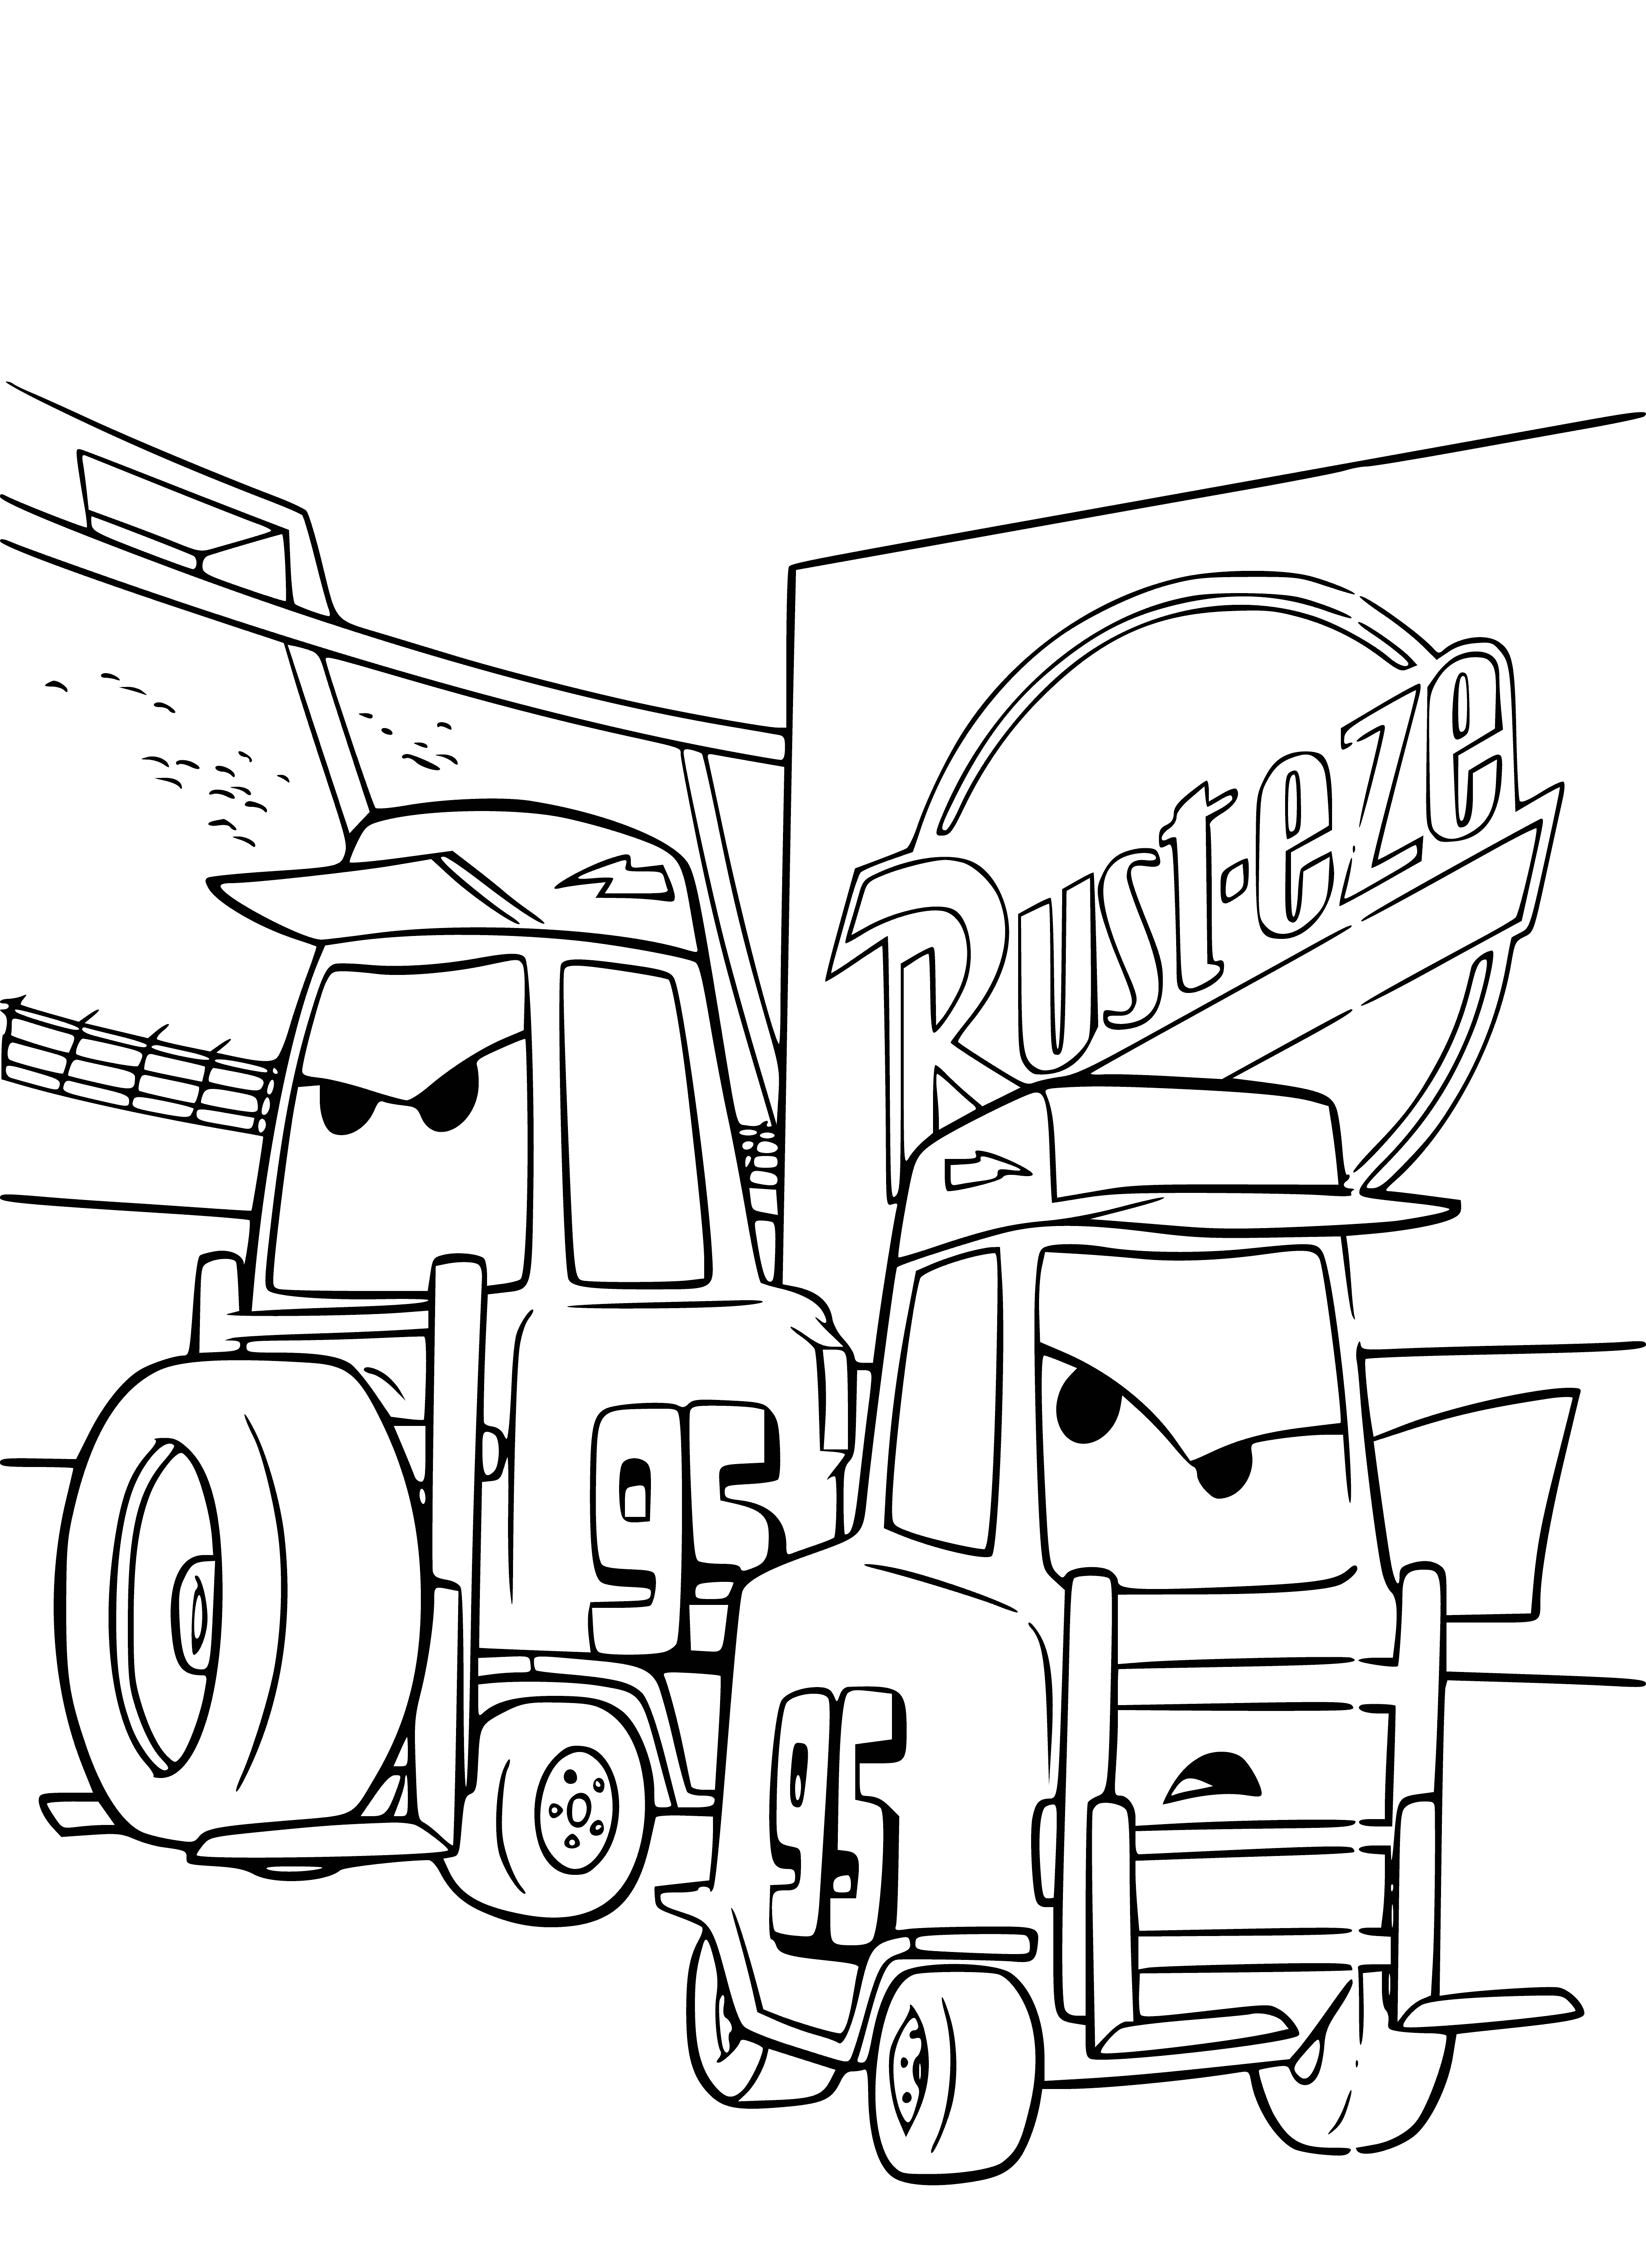 coloring page: Lightning McQueen & team race in Cars, with Mater, Sally & Doc cheering him on. He speeds towards the finish line!